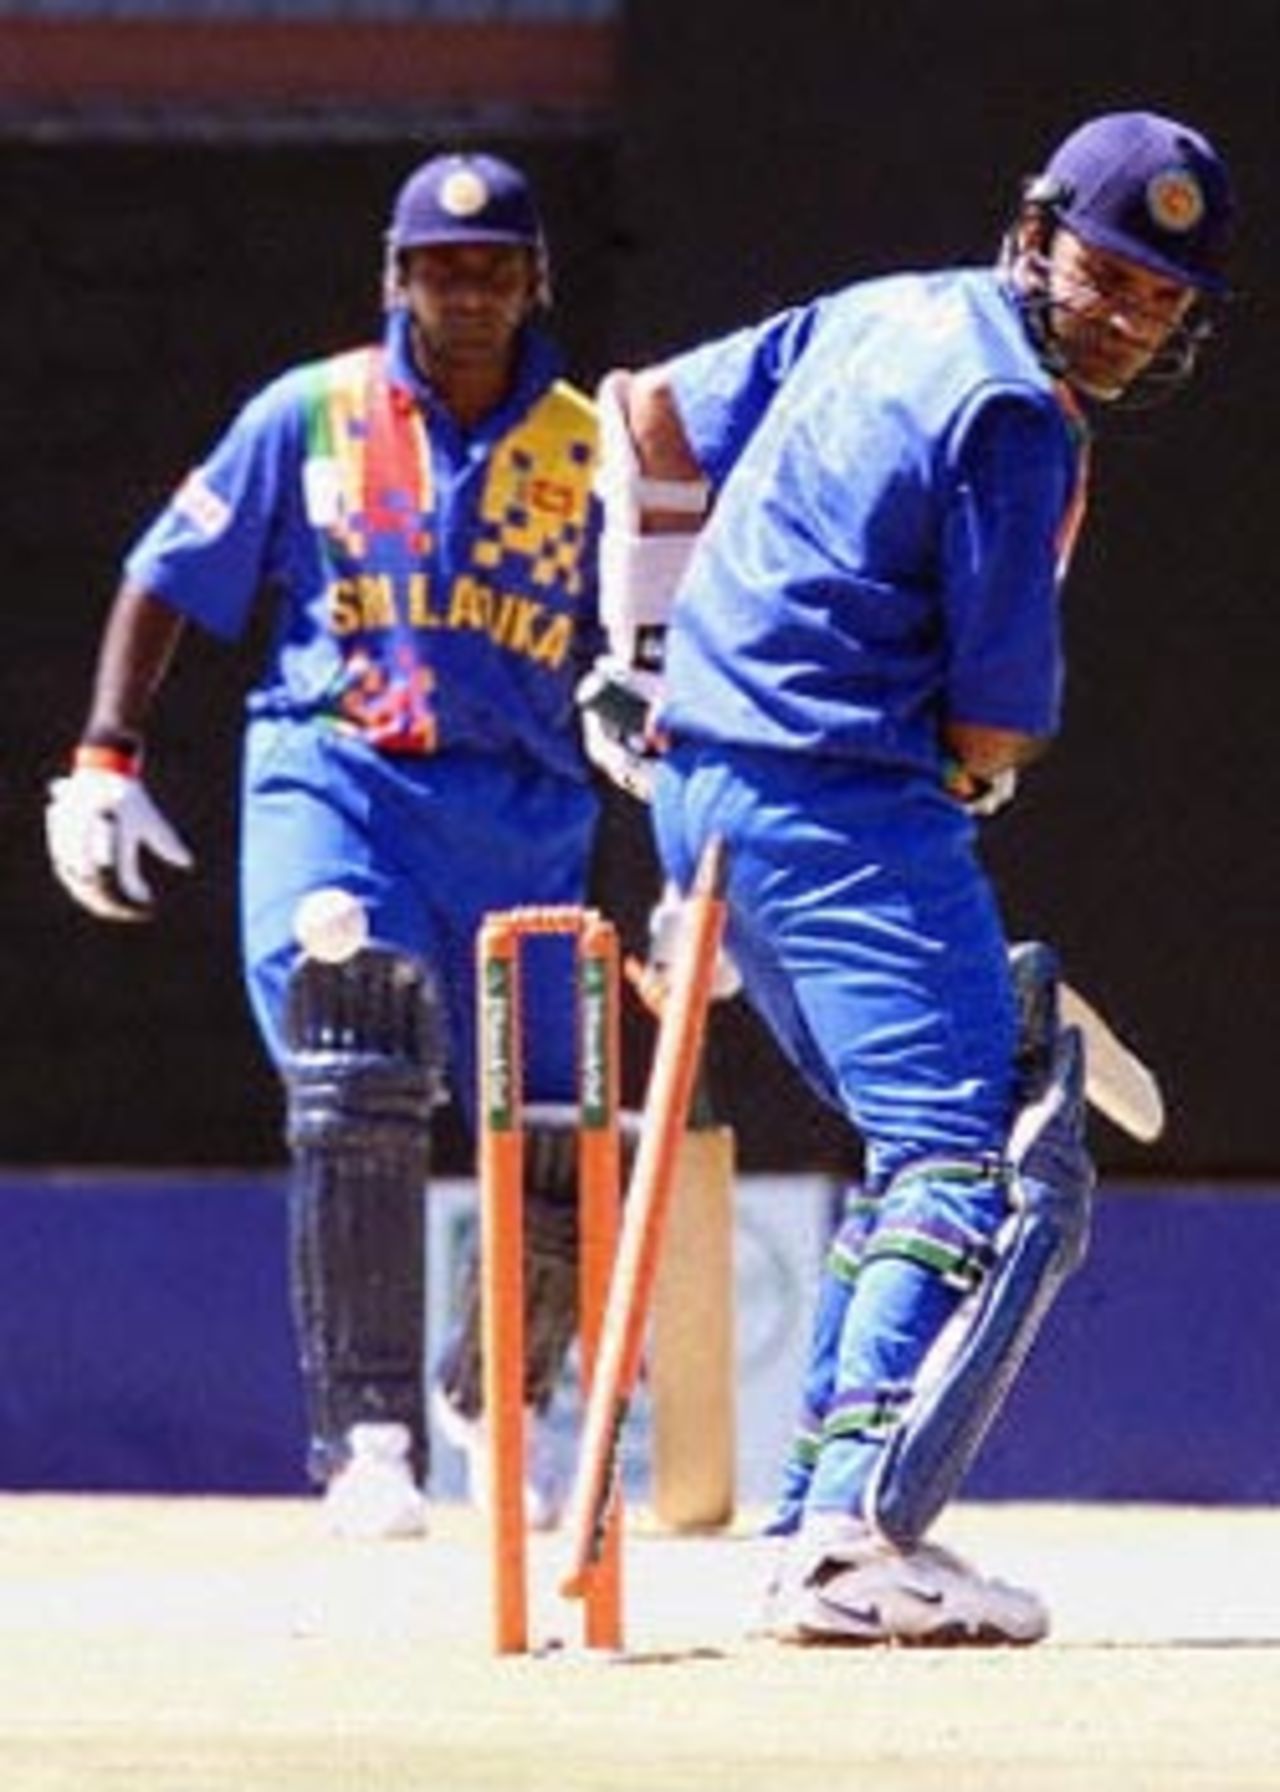 Sri Lanka batsman Marvan Attapatu watches as his stump falls bowled by West Indies fast bowler Mervyn Dillon on the second match of the ICC KnockOut, 2000/01, 2nd Preliminary Quarter Final, Sri Lanka v West Indies, Gymkhana Club Ground, Nairobi, 04 October 2000.